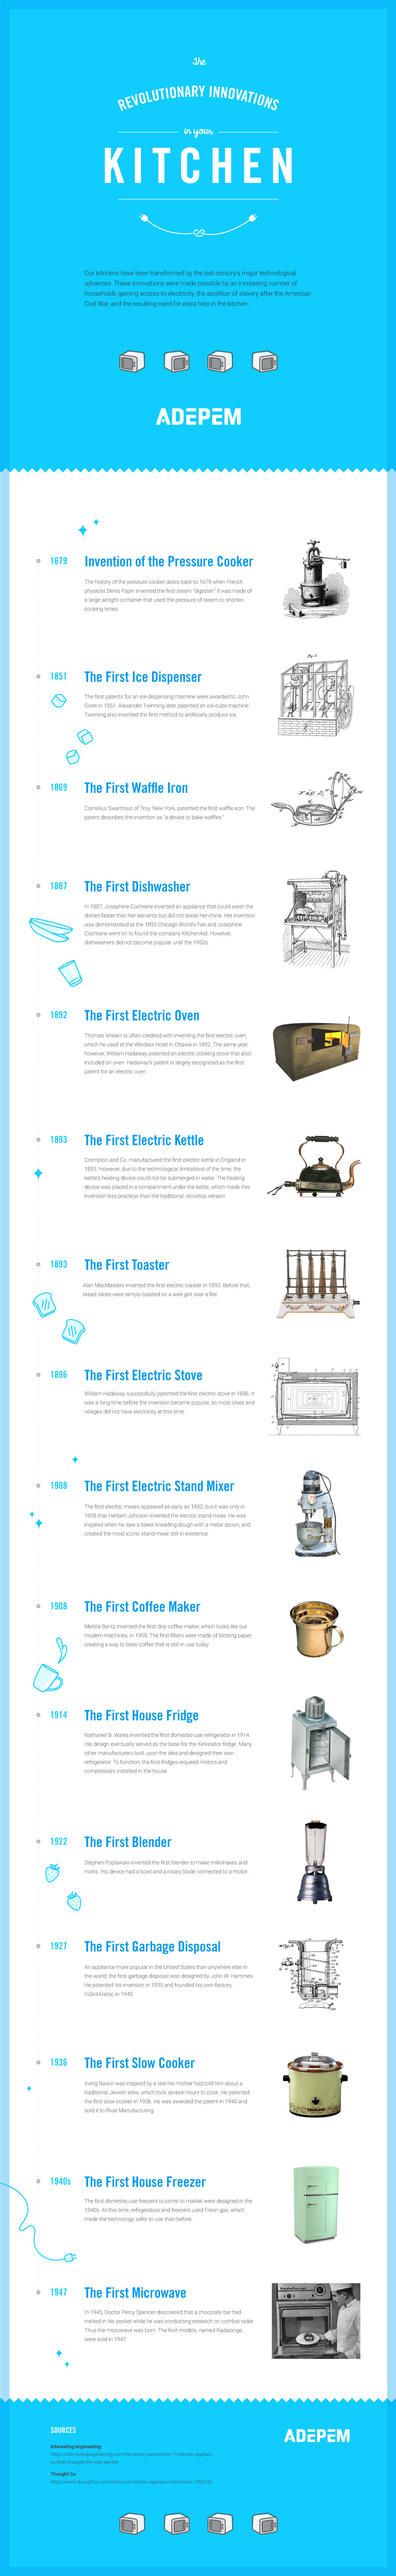 Innovations in Kitchen Appliances Throughout History